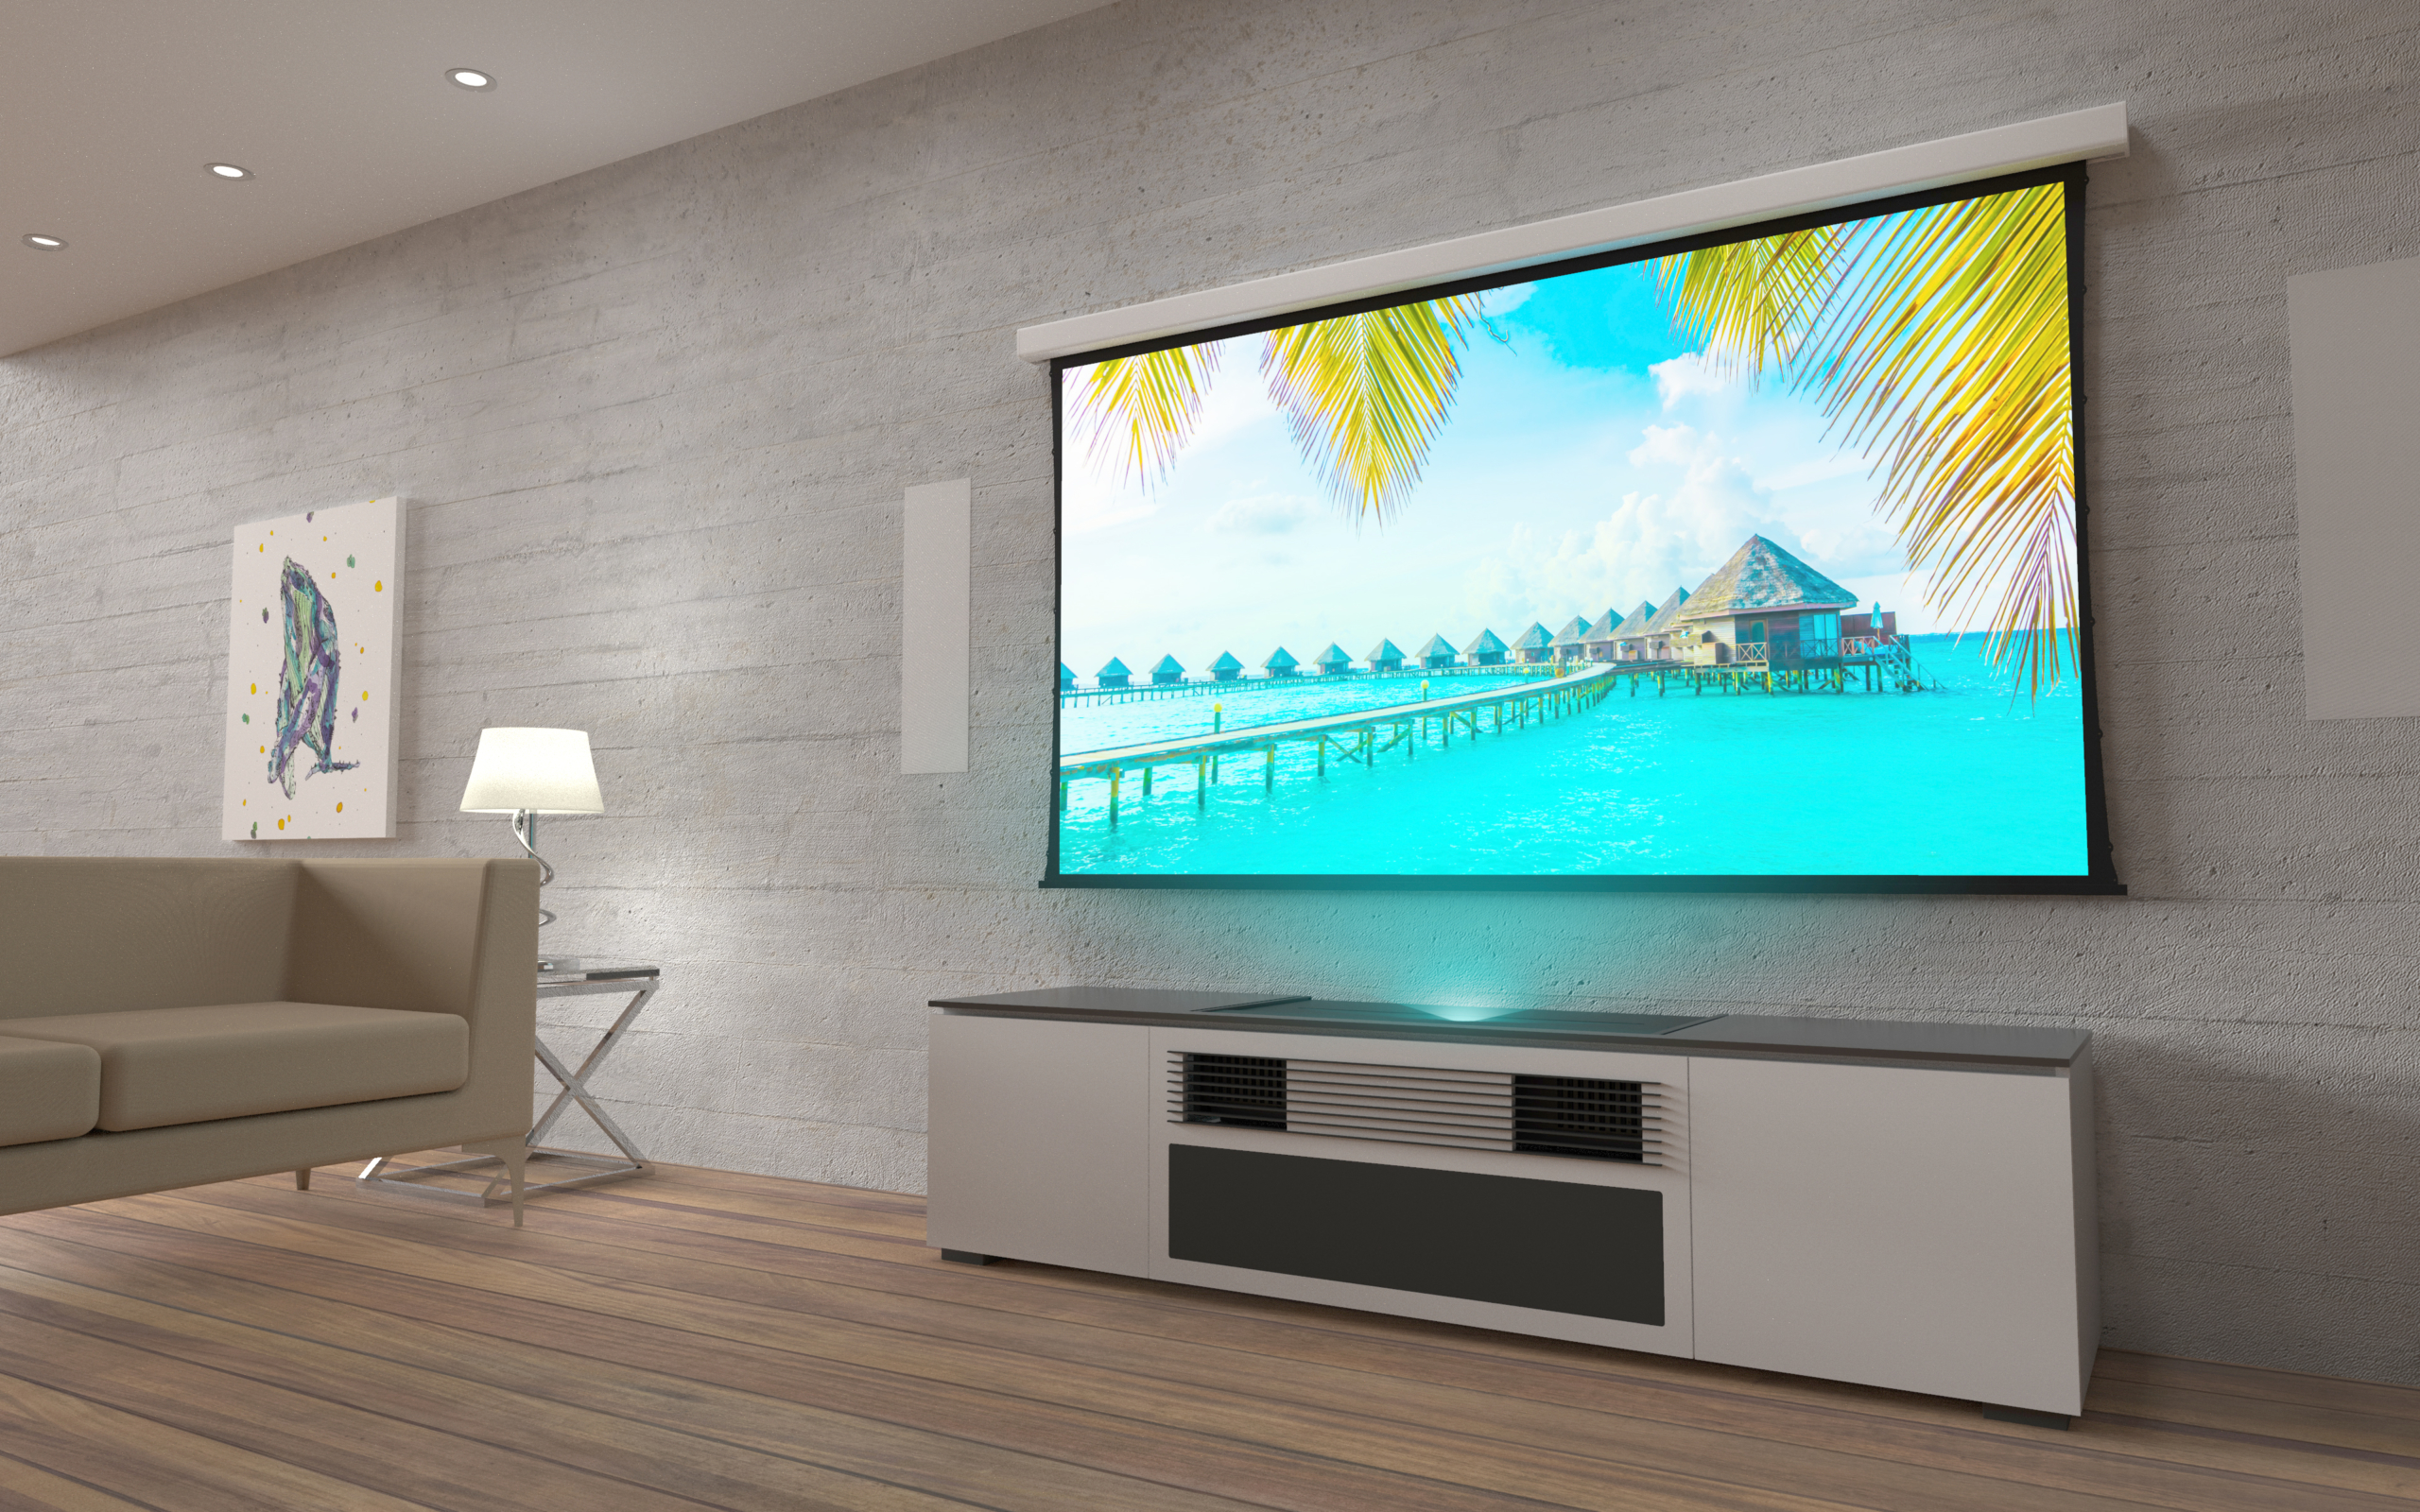 Salamander Designs and Screen Innovations Team Up to Provide Fast, Modern “Place Projector Here” Solutions for Customers